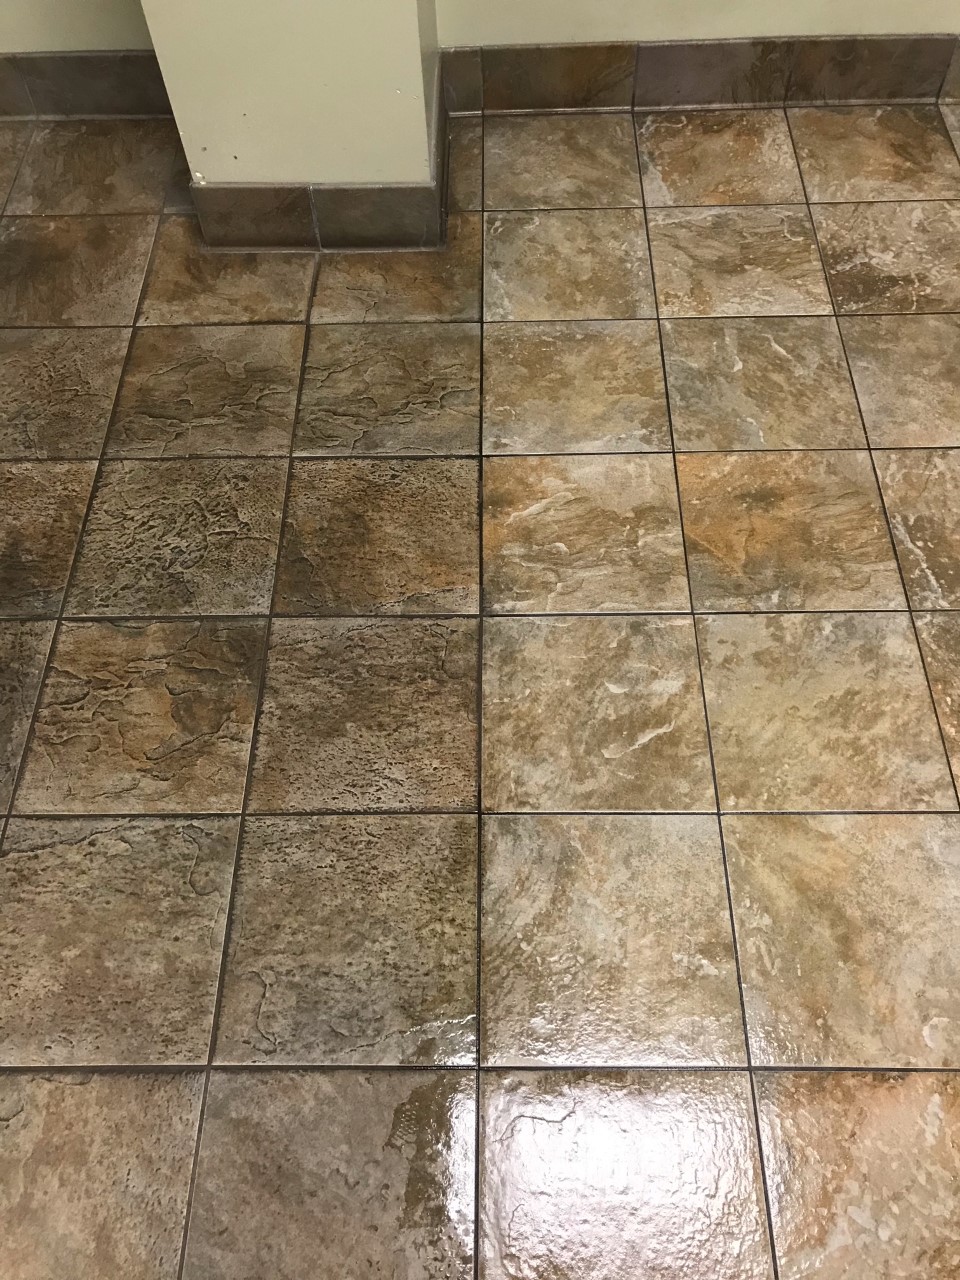 How to Clean Tile Floors, No Matter What Type (and Grout, Too!)